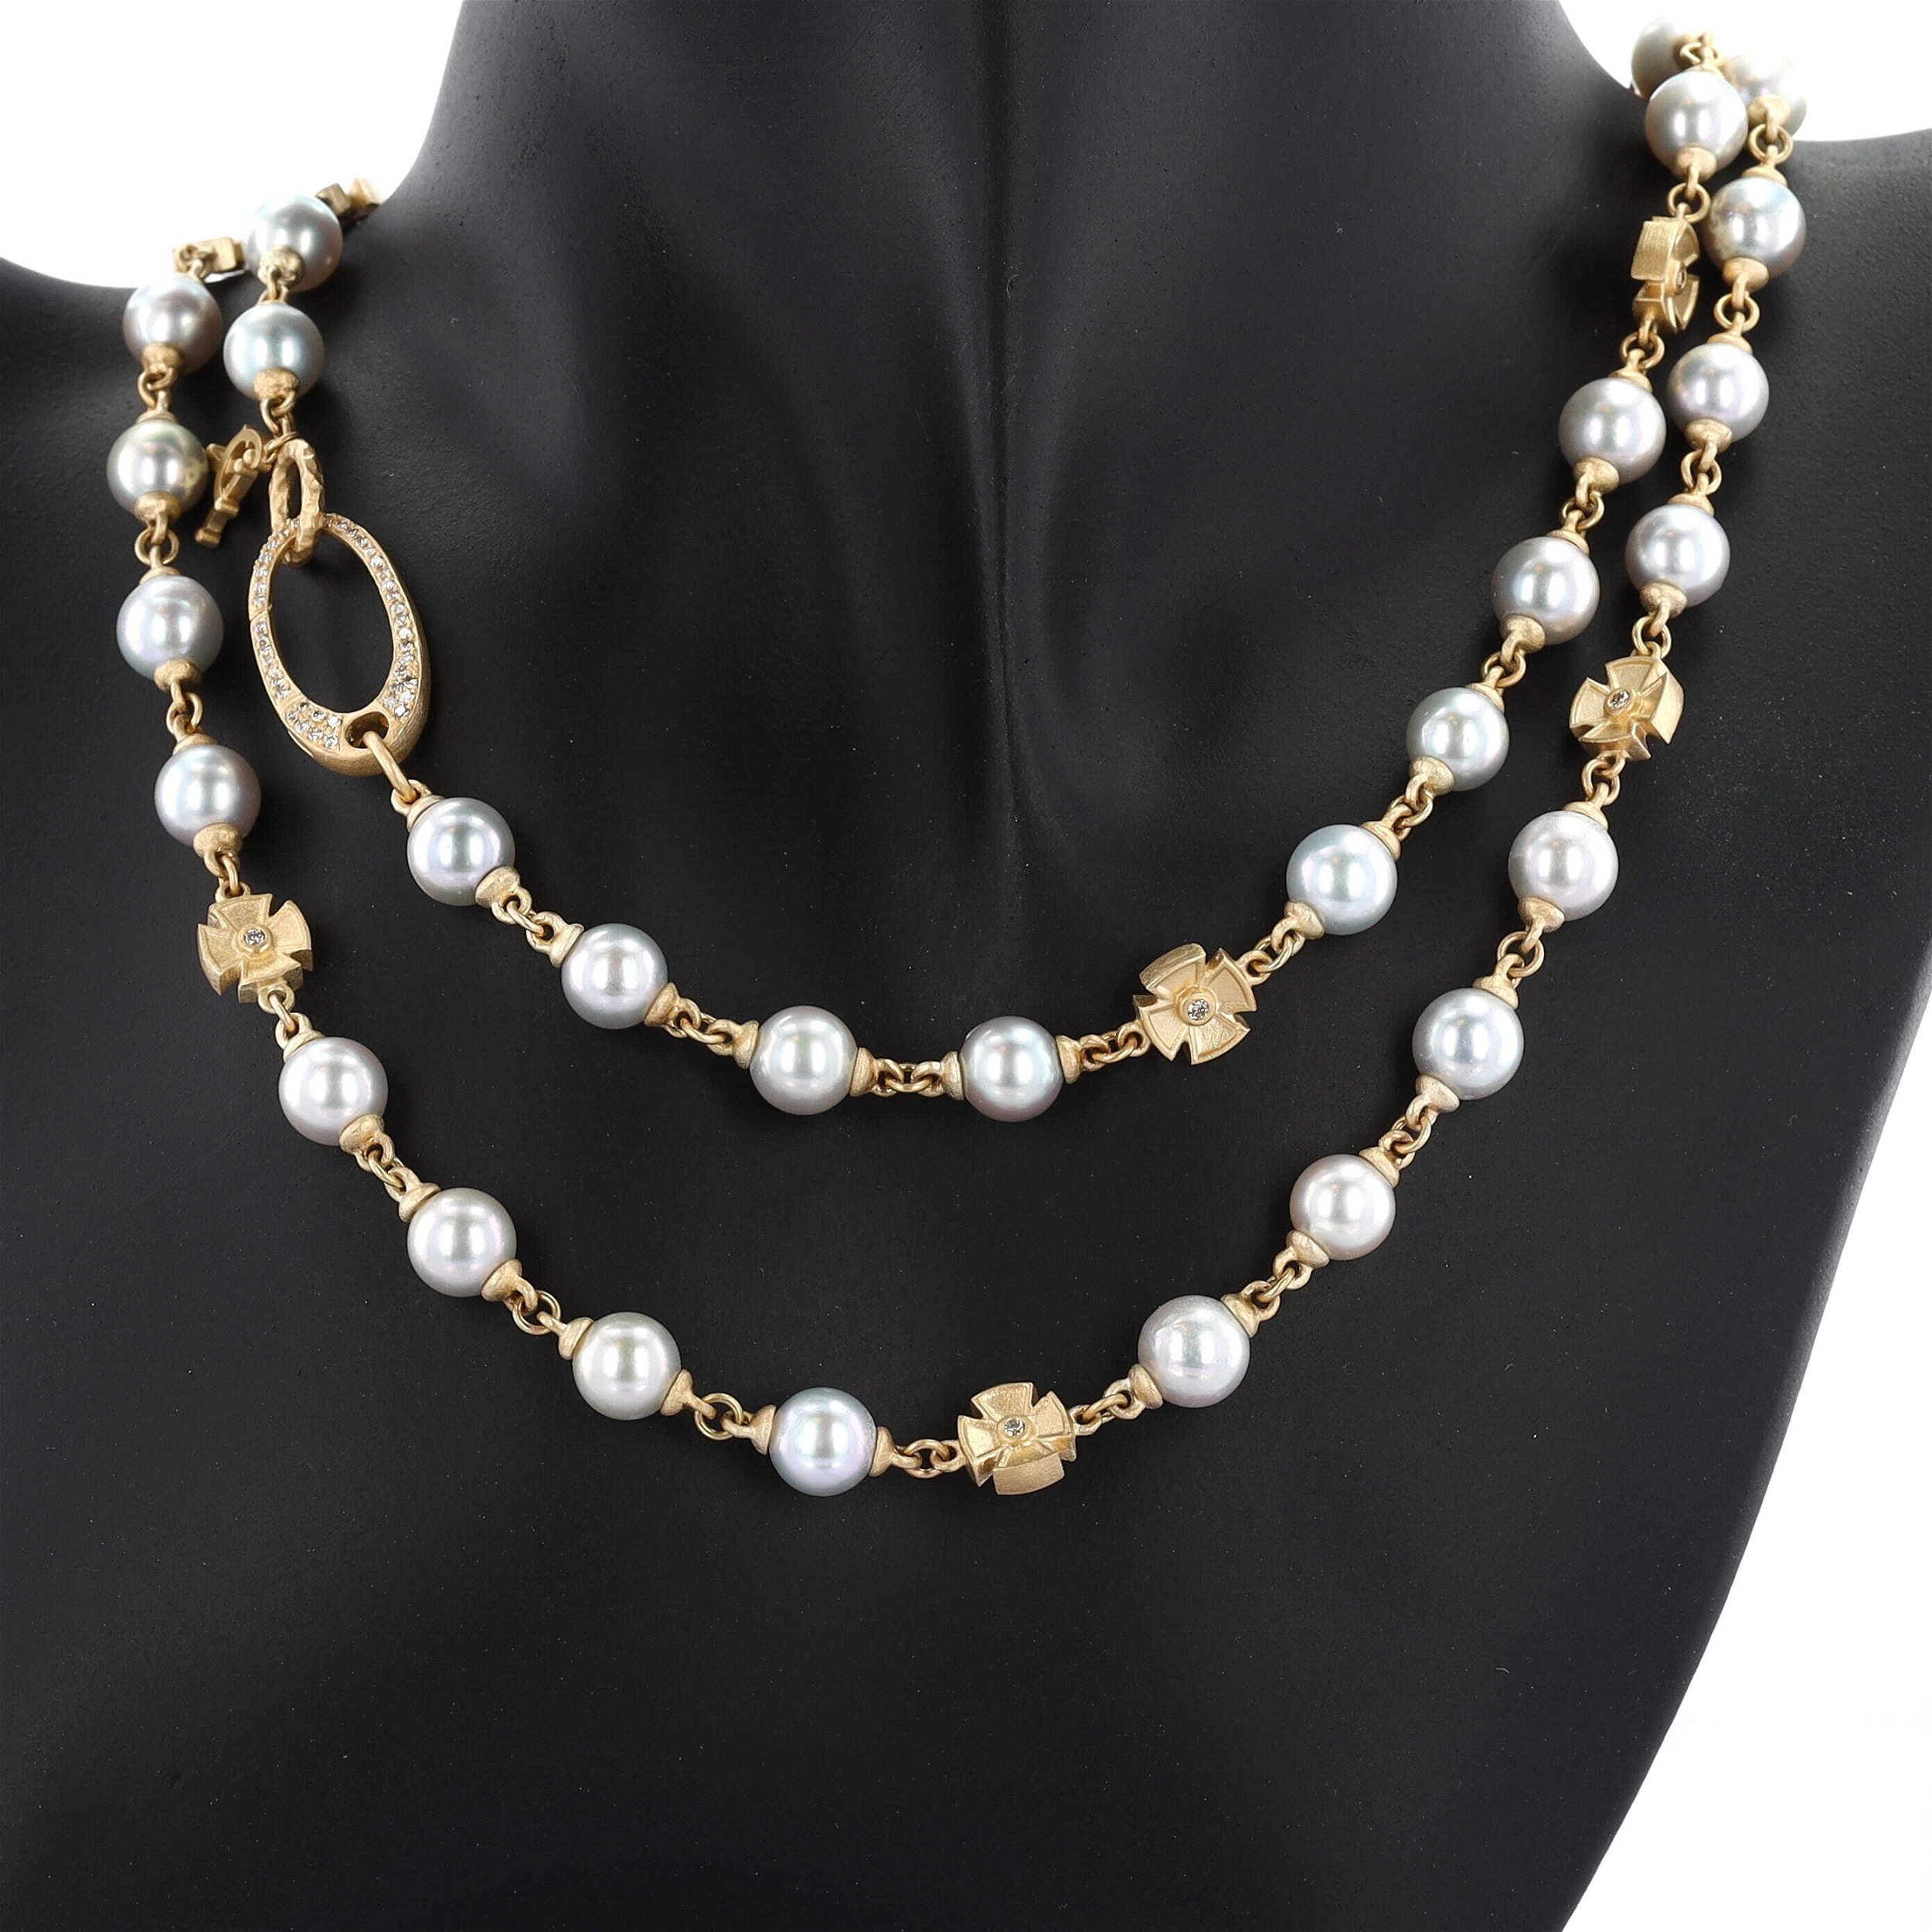 Amazon.com: Simulated Pearl Necklace Rhinestone Faux Diamond Clasp Kenneth  Lane Jewelry 3 Rows 10mm Pearls Jackie Kennedy Repro: Pendant Necklaces:  Clothing, Shoes & Jewelry